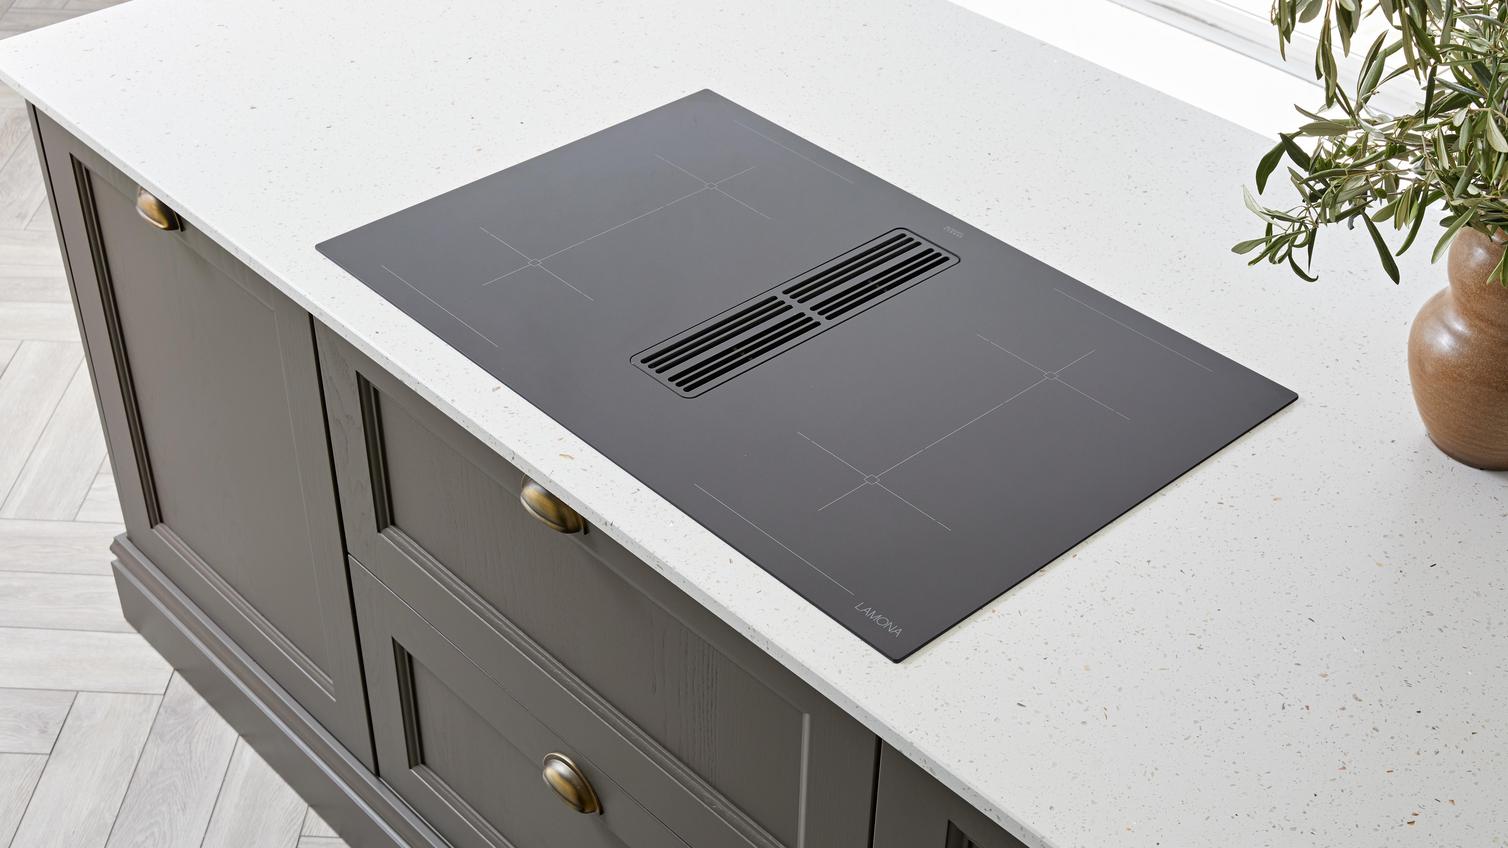 A black, integrated induction hob with a built-in extractor. It is fitted in a brown kitchen island in a white worktop.